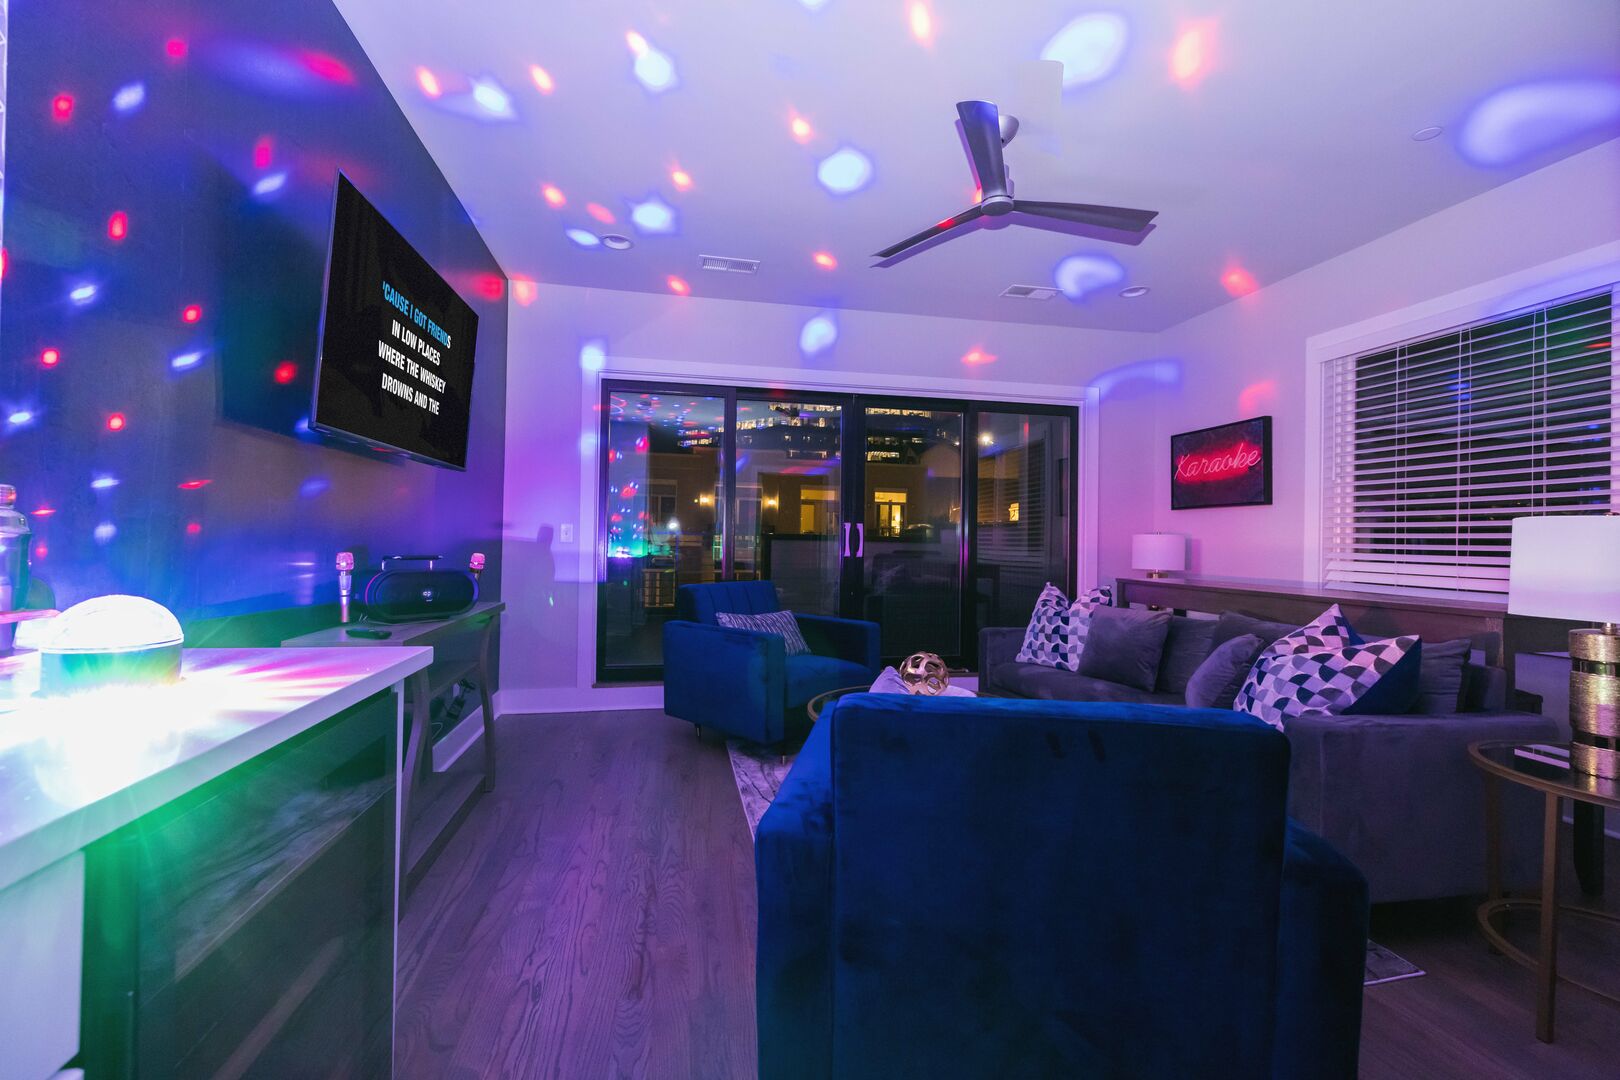 Top floor living space with wet bar, smart TV, karaoke, colorful light display, and access to rooftop patio!